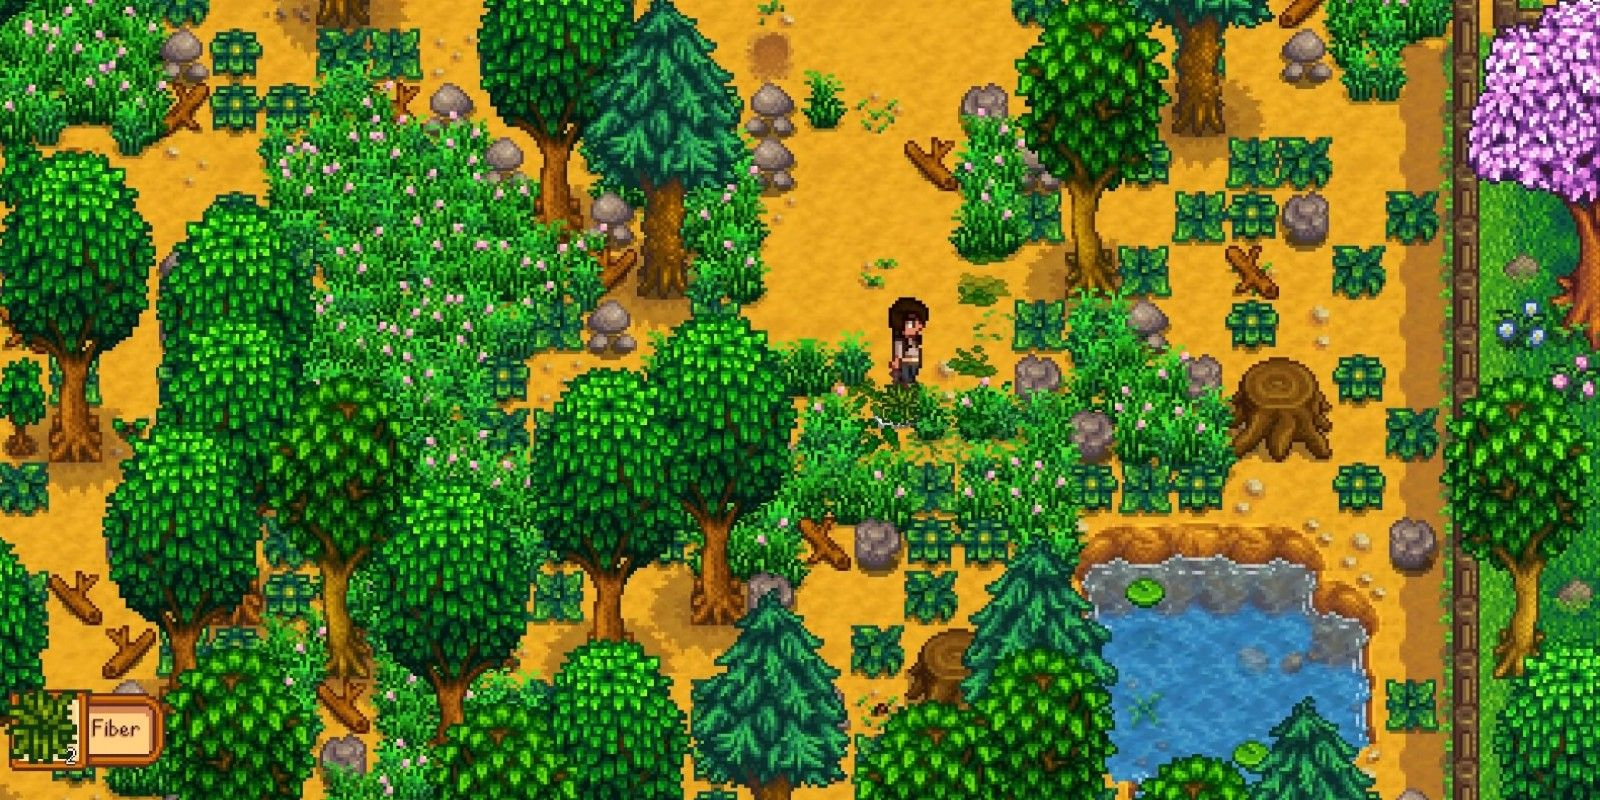 Stardew Valley Year One Guide (Crops, Mining & Upgrades)